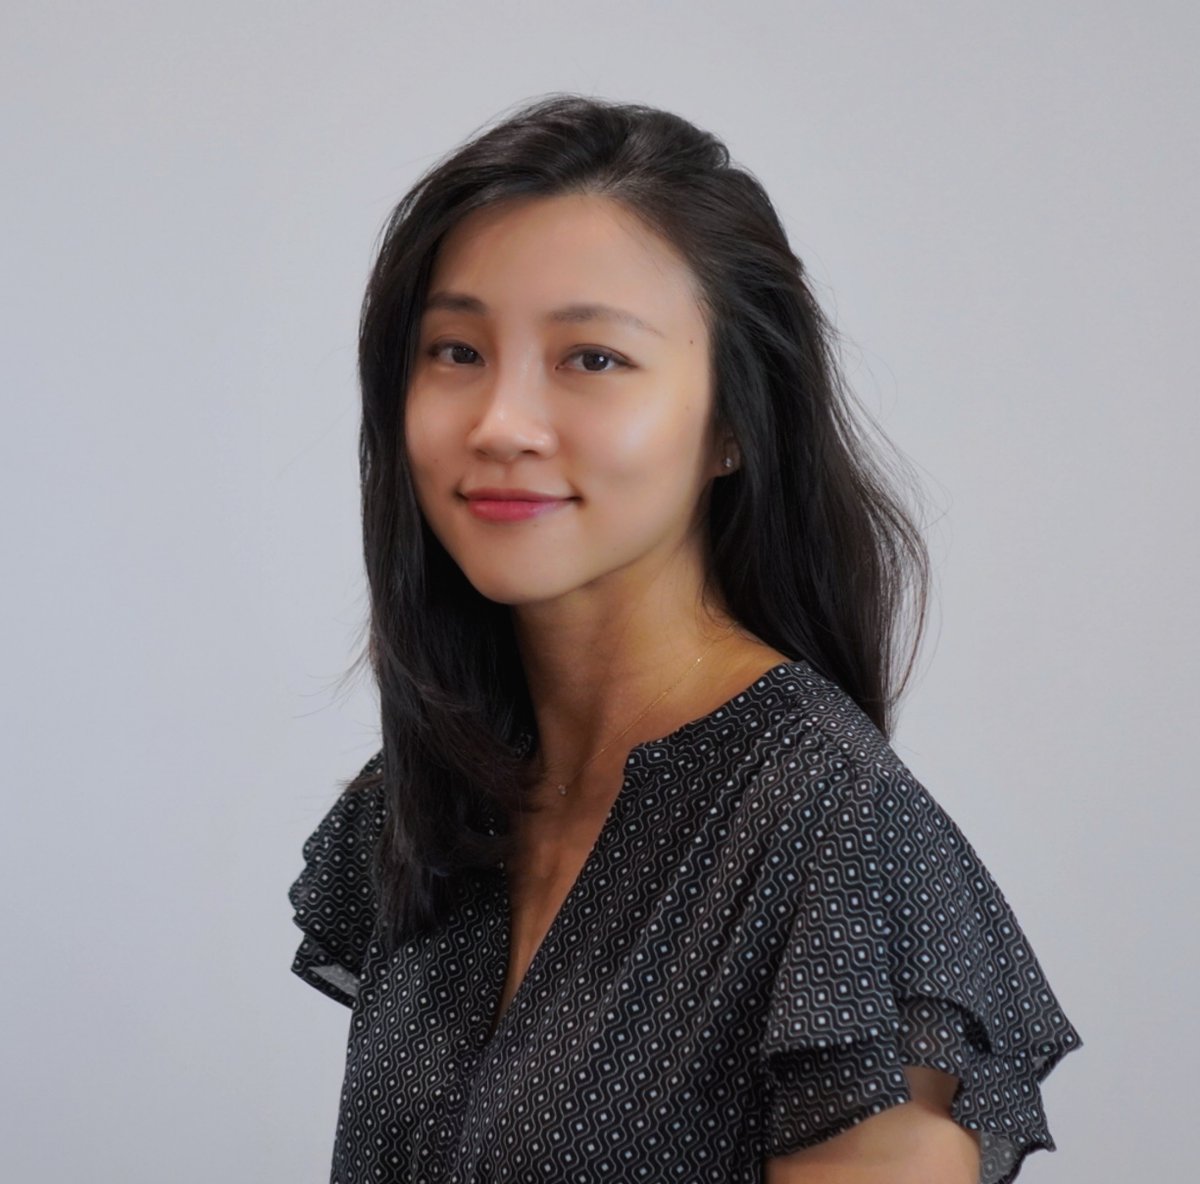 🌟 Exciting news! Our Postdoctoral Researcher, Ying Wong, has been awarded the prestigious @JDRFaus International Postdoctoral Fellowship! 🙌🏼 Her groundbreaking immunogenomics research is dedicated to uncovering early drivers of Type 1 Diabetes in children 🧬🔍